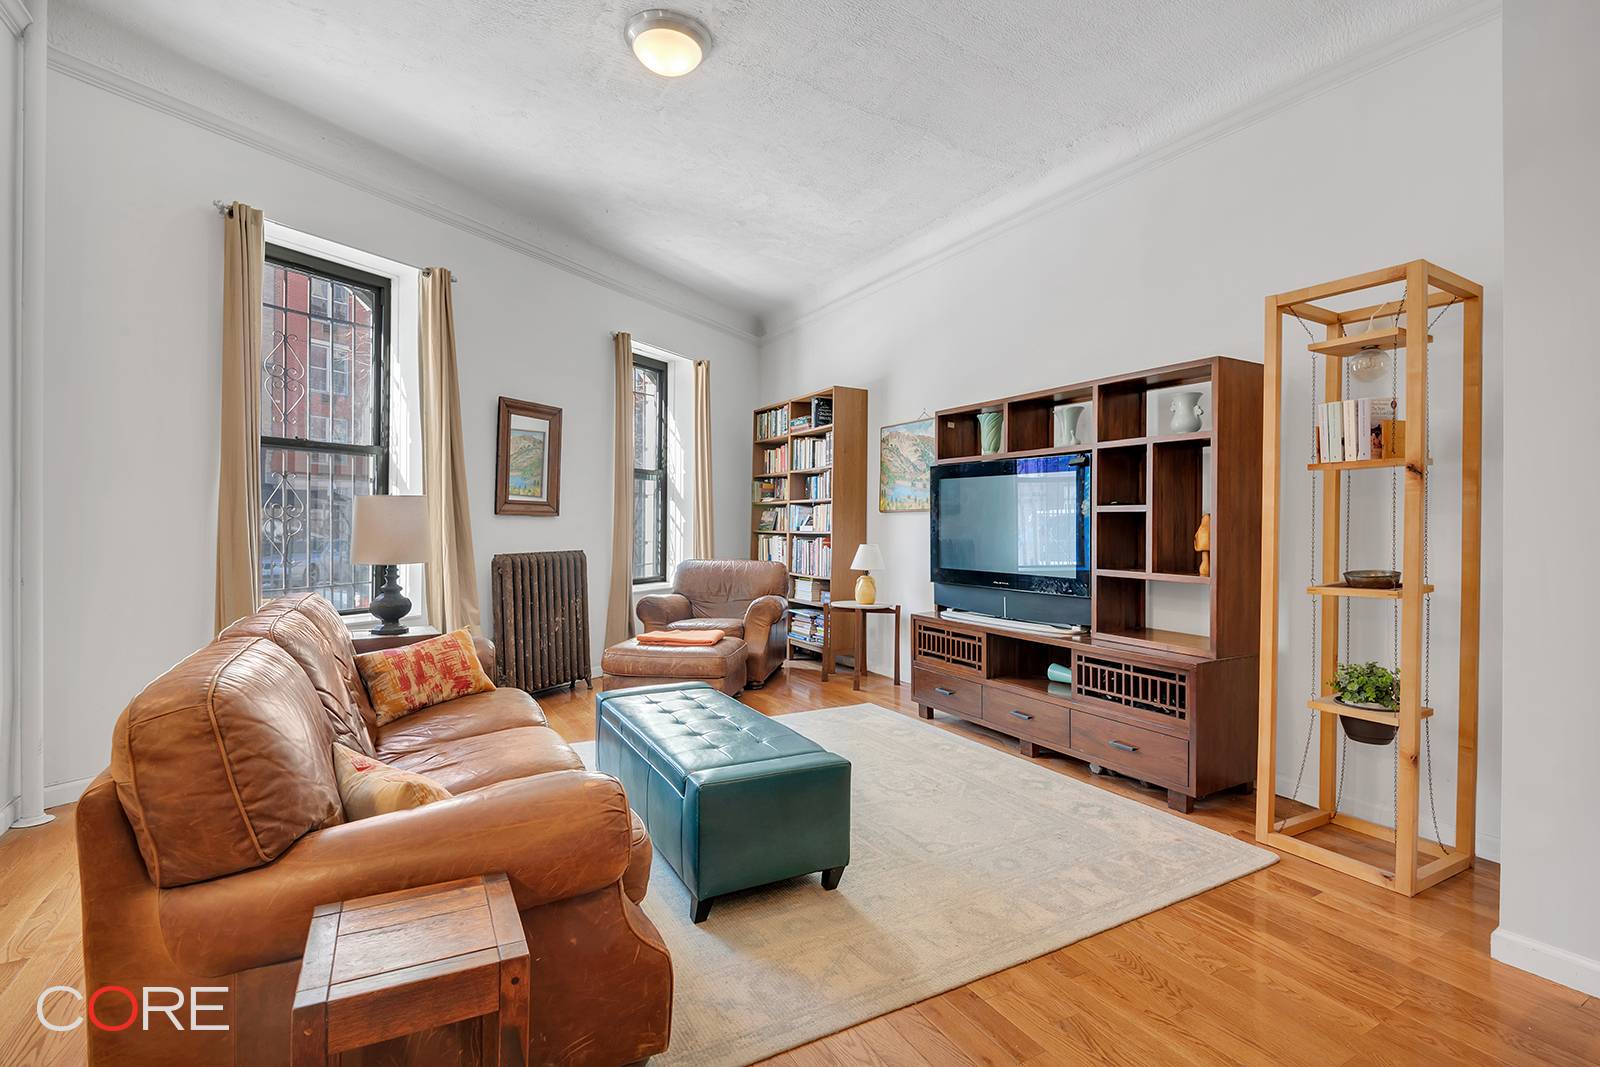 Welcome to apartment 1, a two bedroom convertible to three, one a half bath HDFC co op in Harlem.